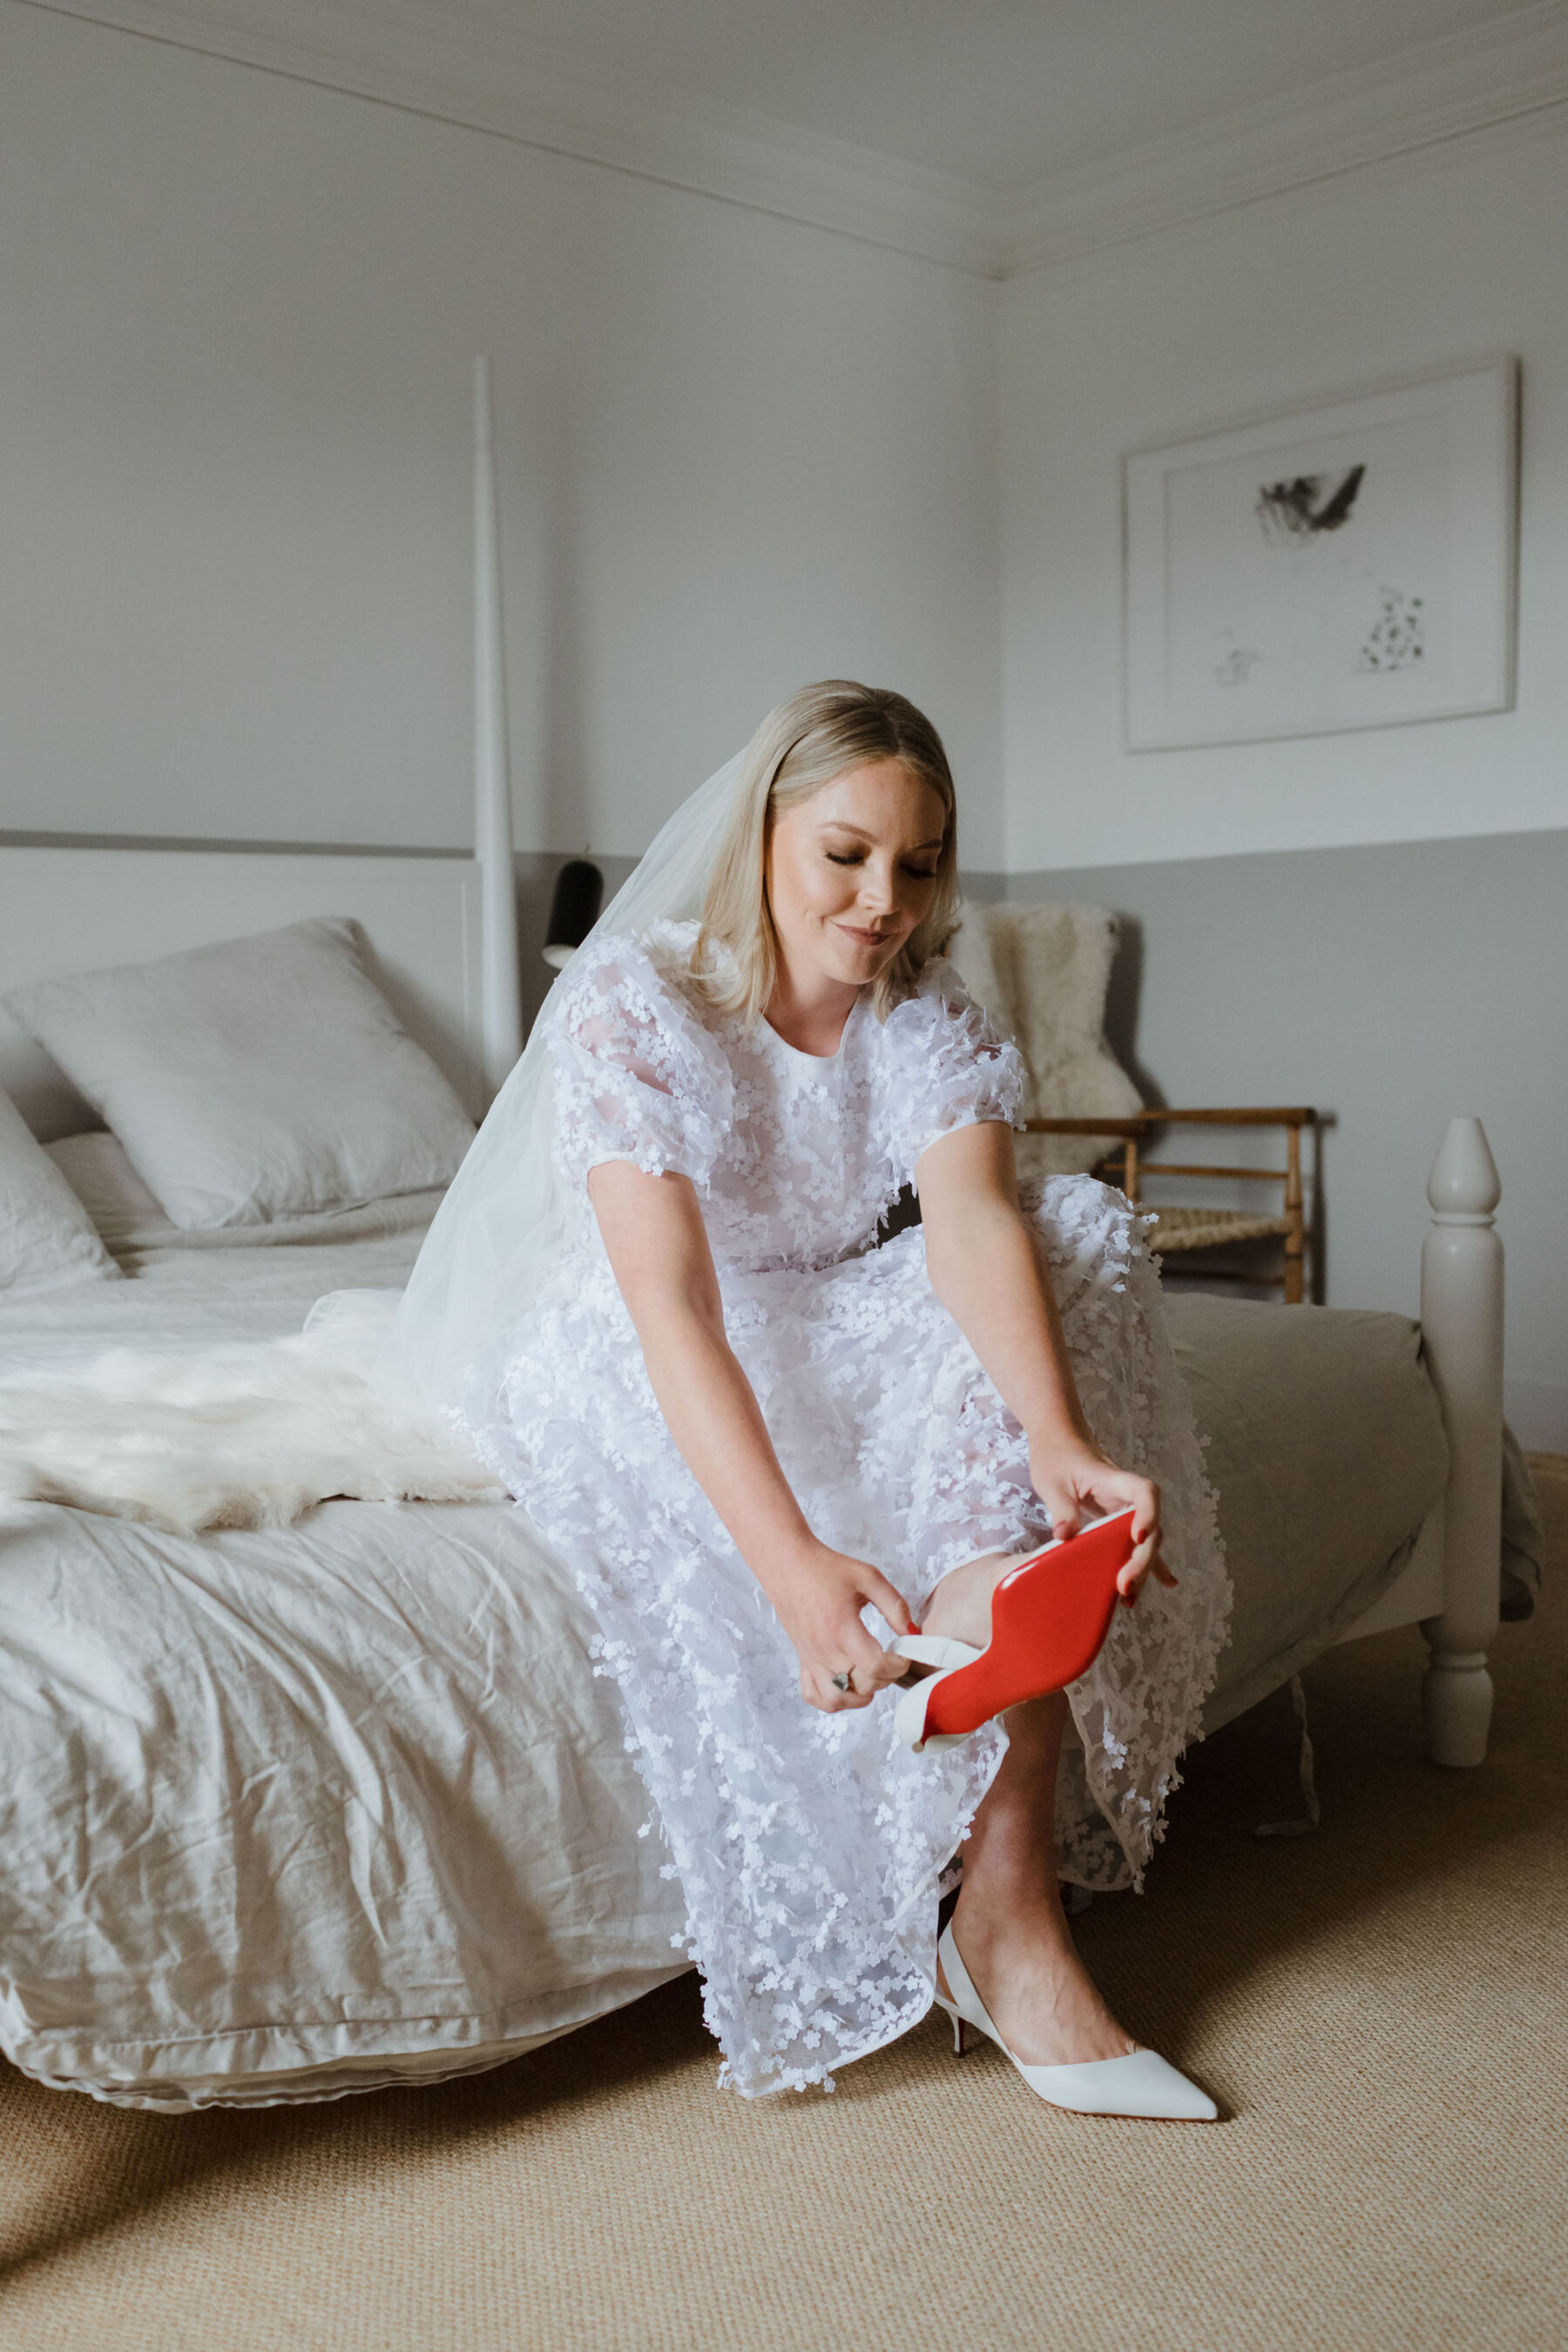 Red undersole of Louboutin wedding shoes. Cecilie Bahnsen wedding dress. Caro Weiss Photography.